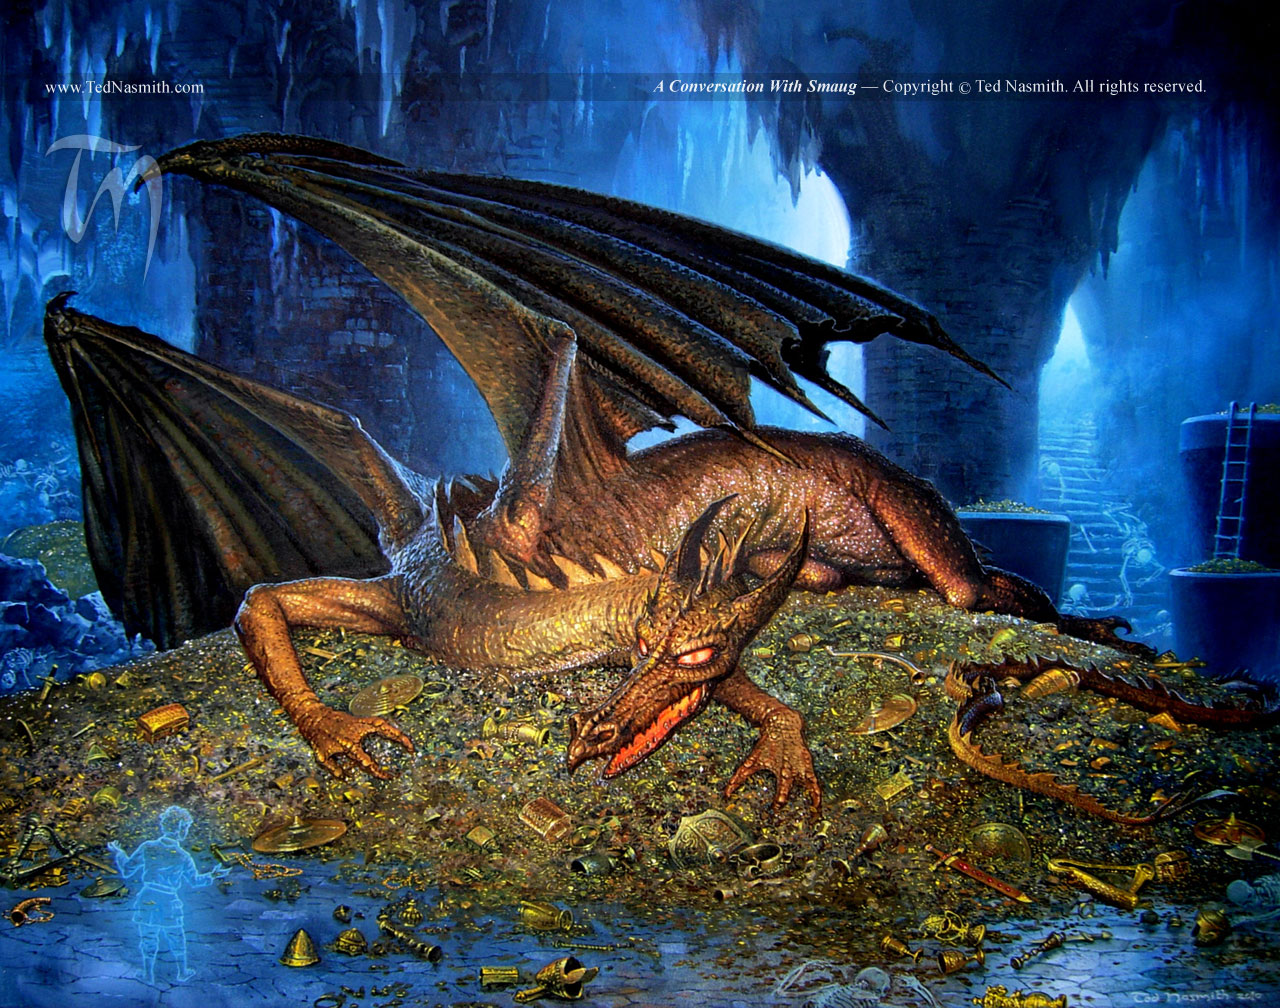 Ted Nasmith | Le Hobbit | A Conversation with Smaug